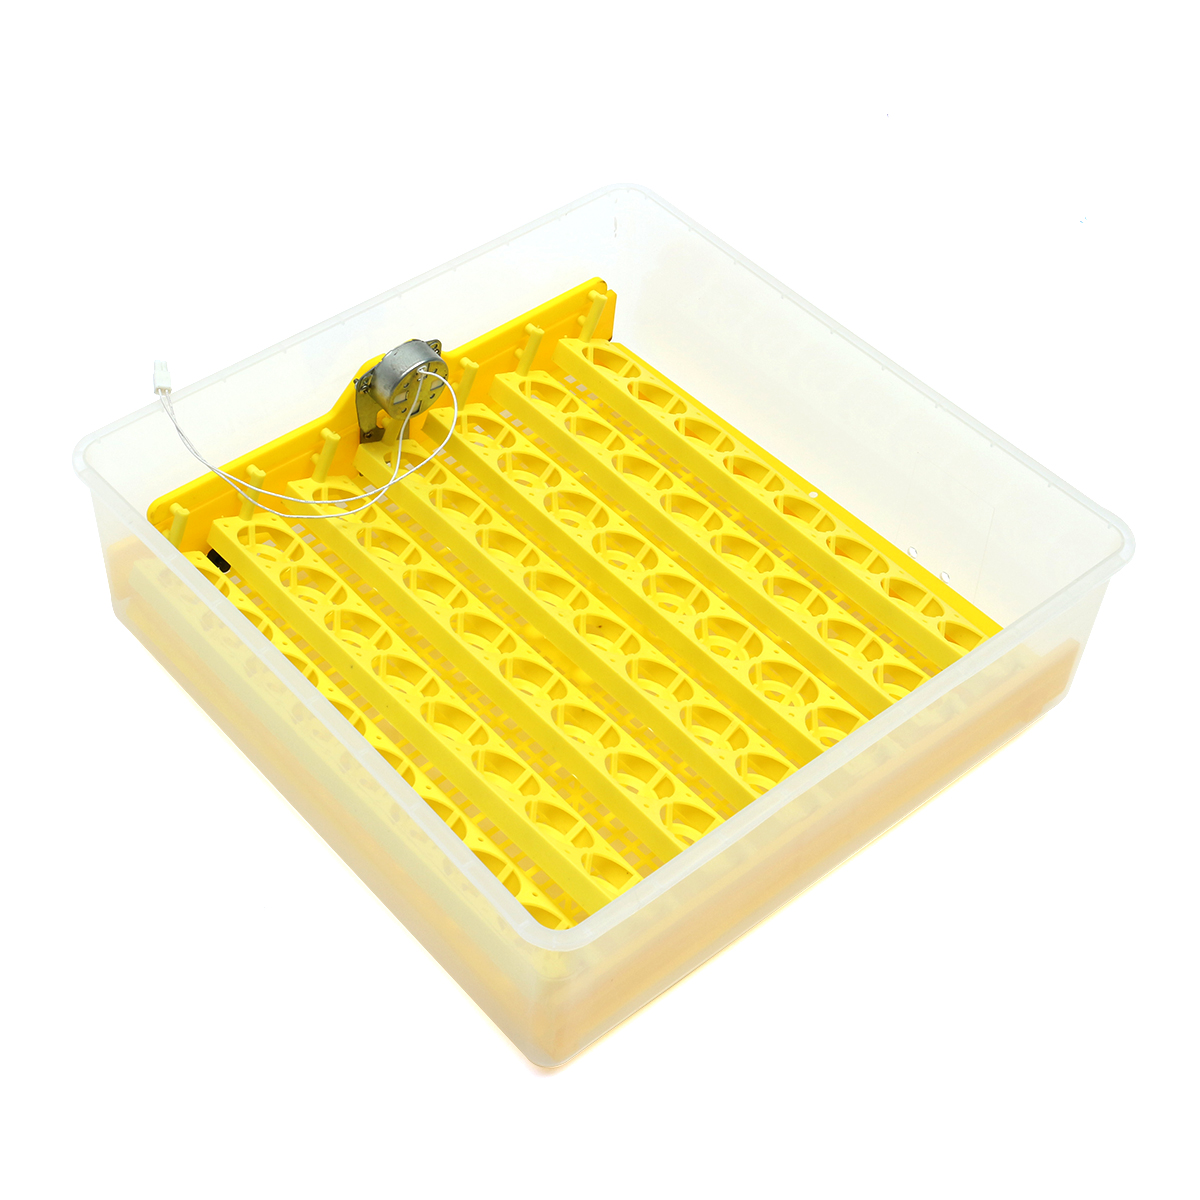 56-Automatic-Egg-Incubator-Digital-Hatching-Poultry-Chicken-Temperature-Control-USEUUK-Plug-1287218-7